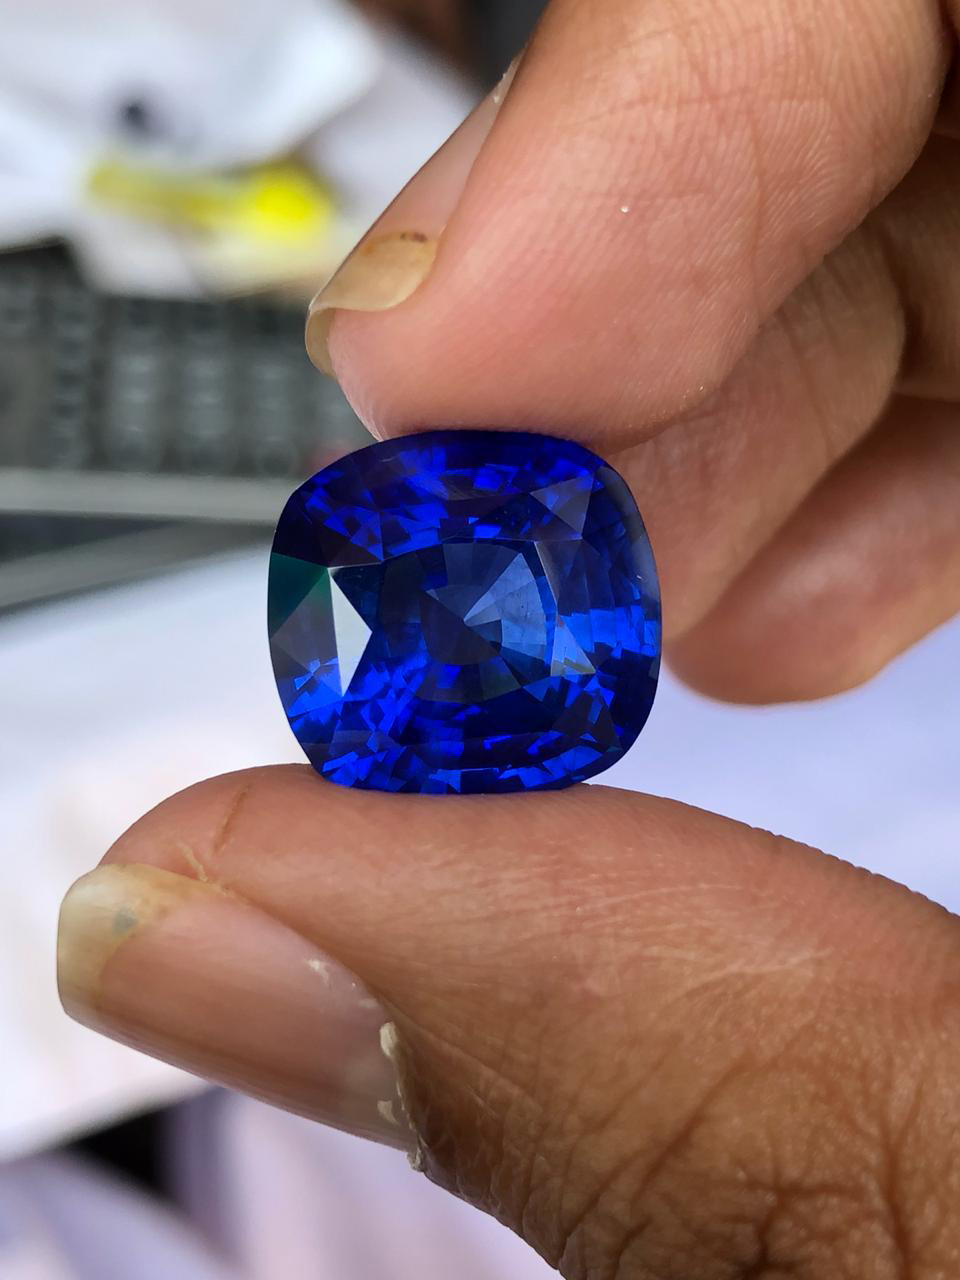 Right: The same sapphire after final polishing. Obviously, a paper clip could scratch the graphite crust, but it would have no impact on the sapphire after polishing.